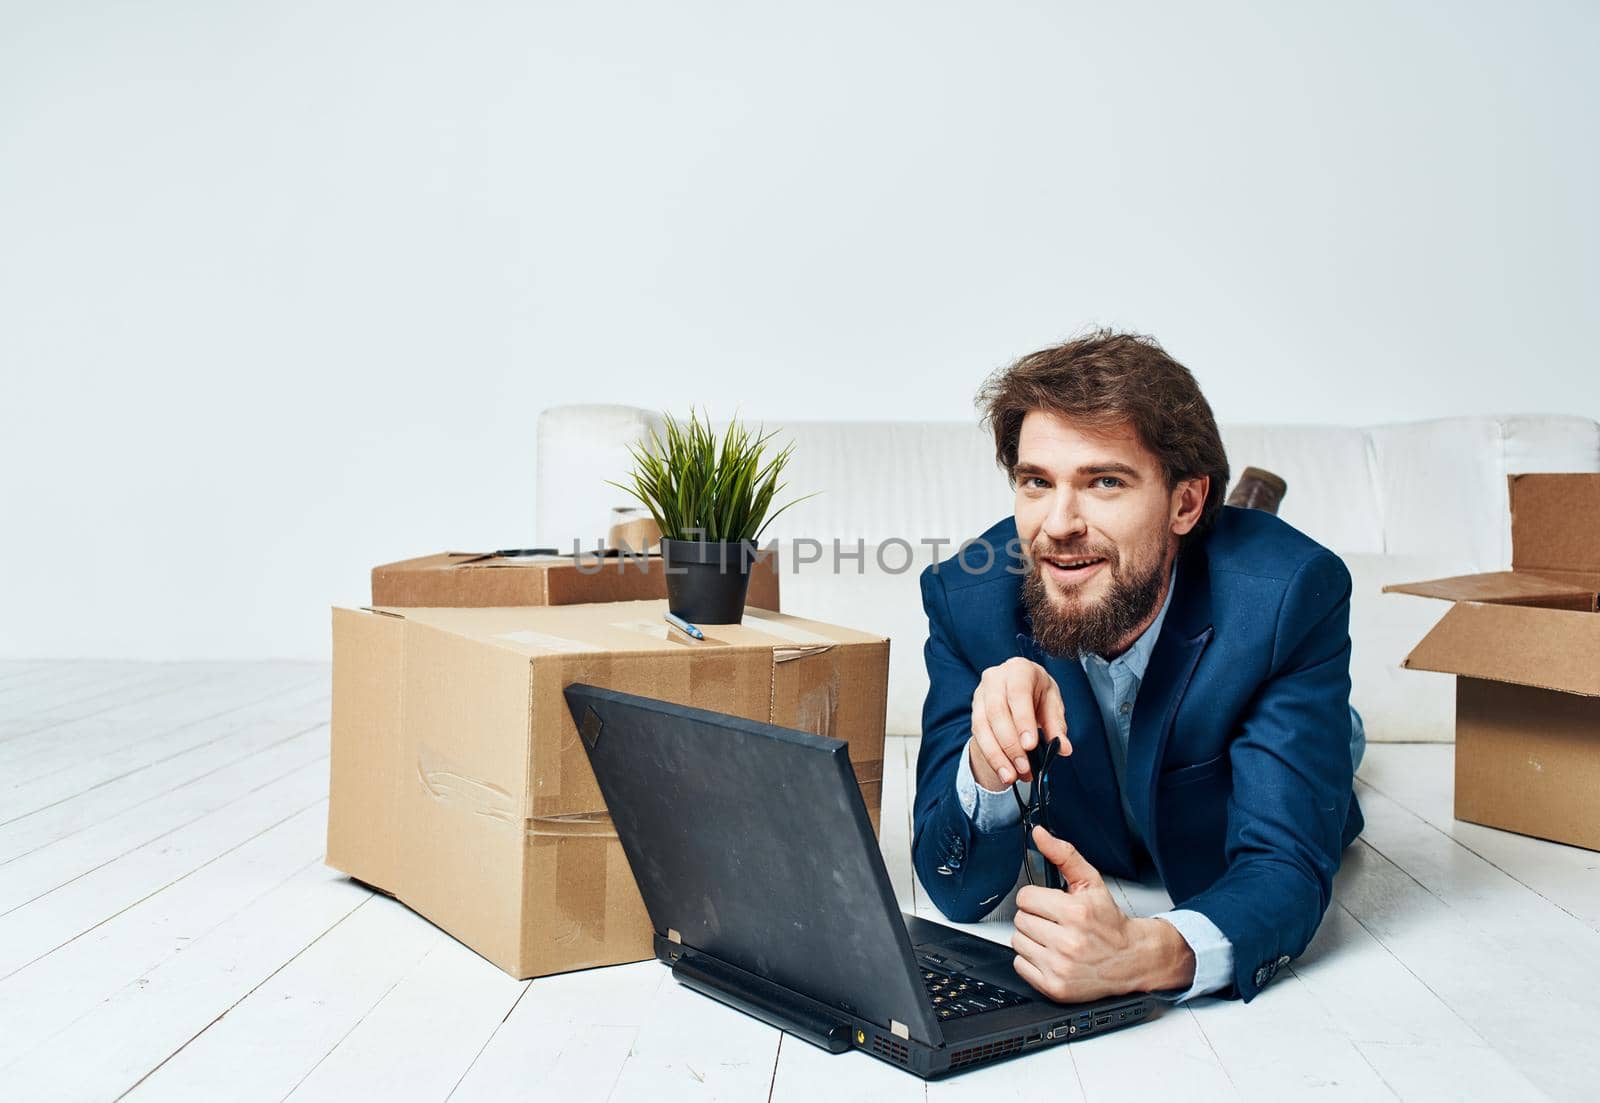 A man lies in front of a laptop boxes with things unpacking Office professional businessman by SHOTPRIME